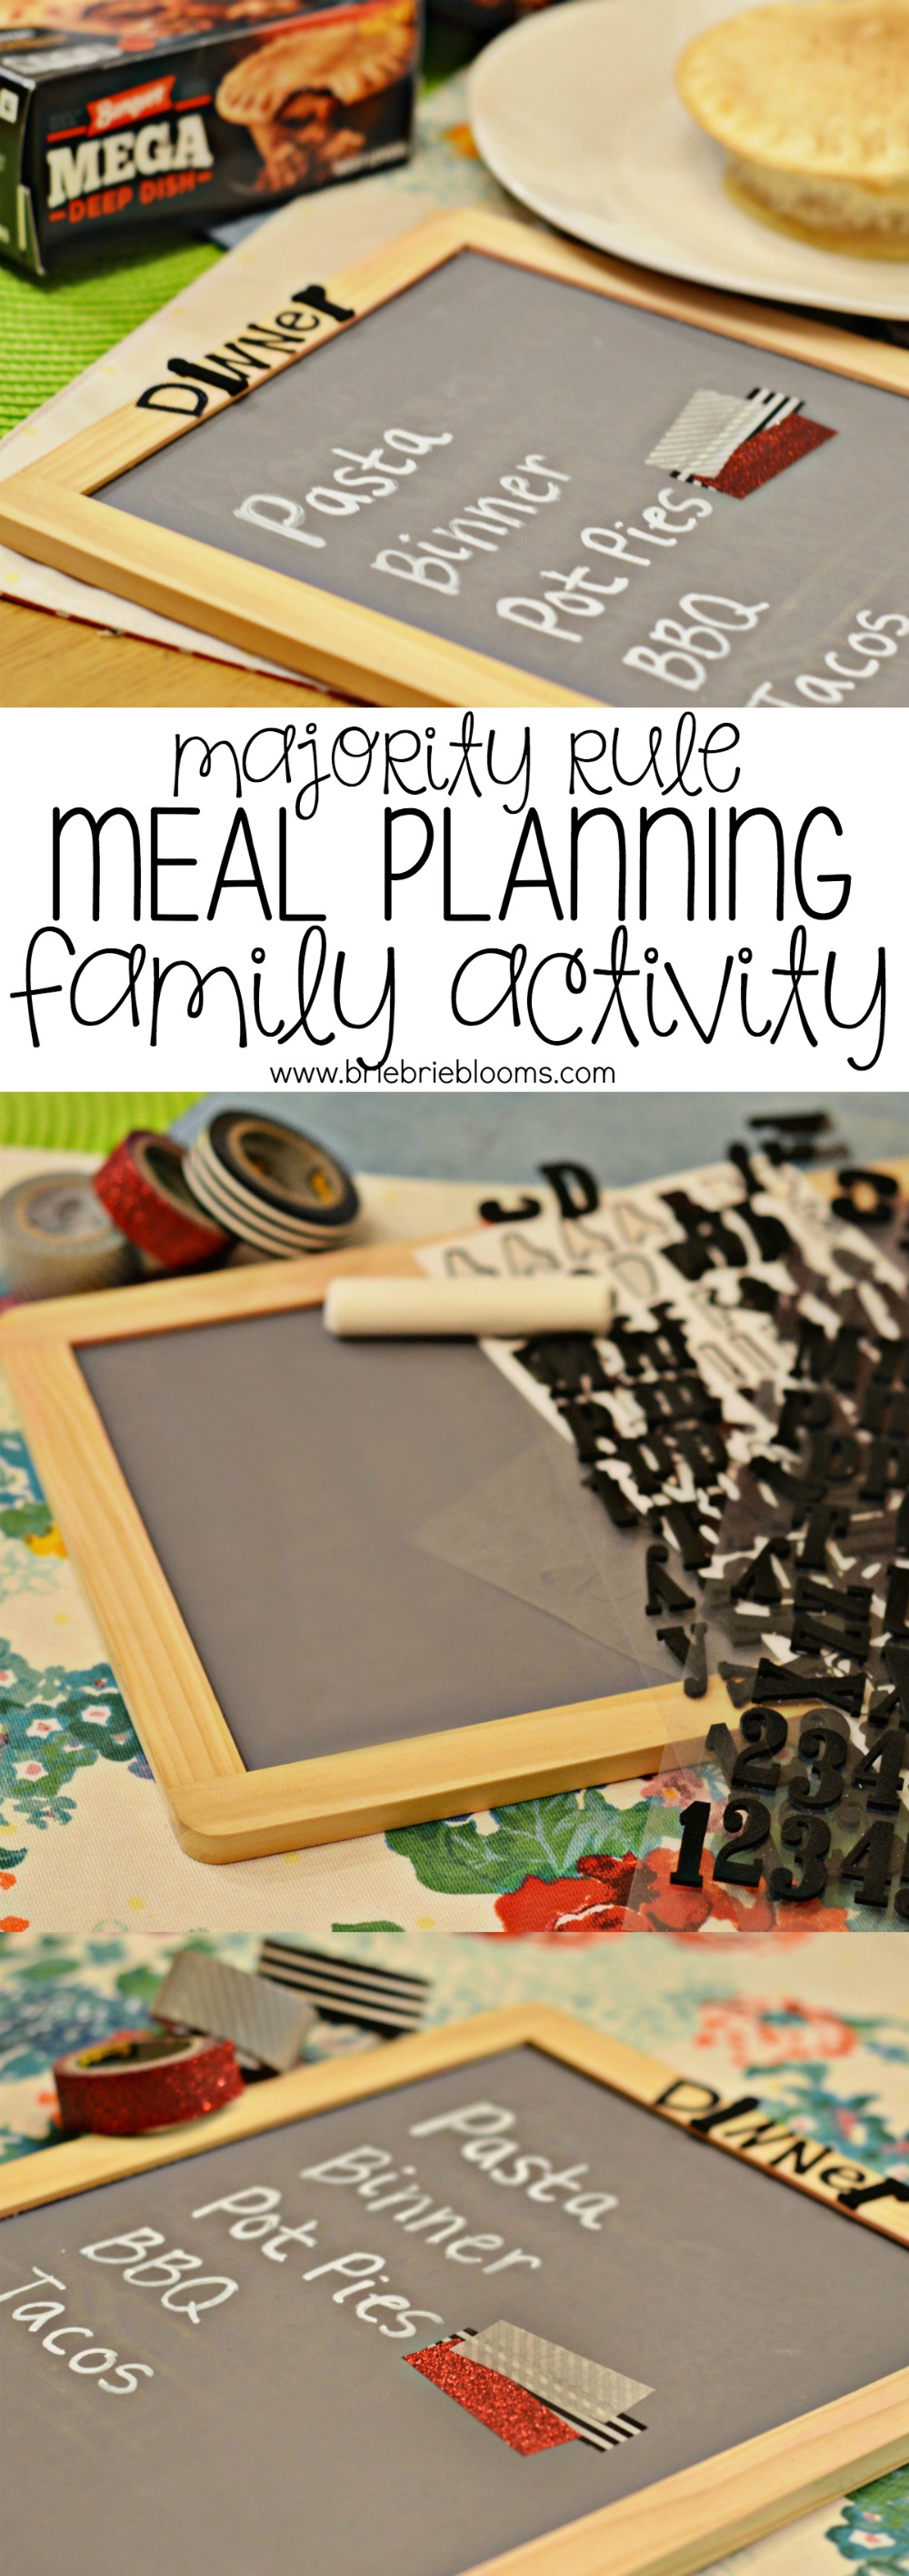 Teach your children about the electoral process with this fun majority rule meal planning family activity.